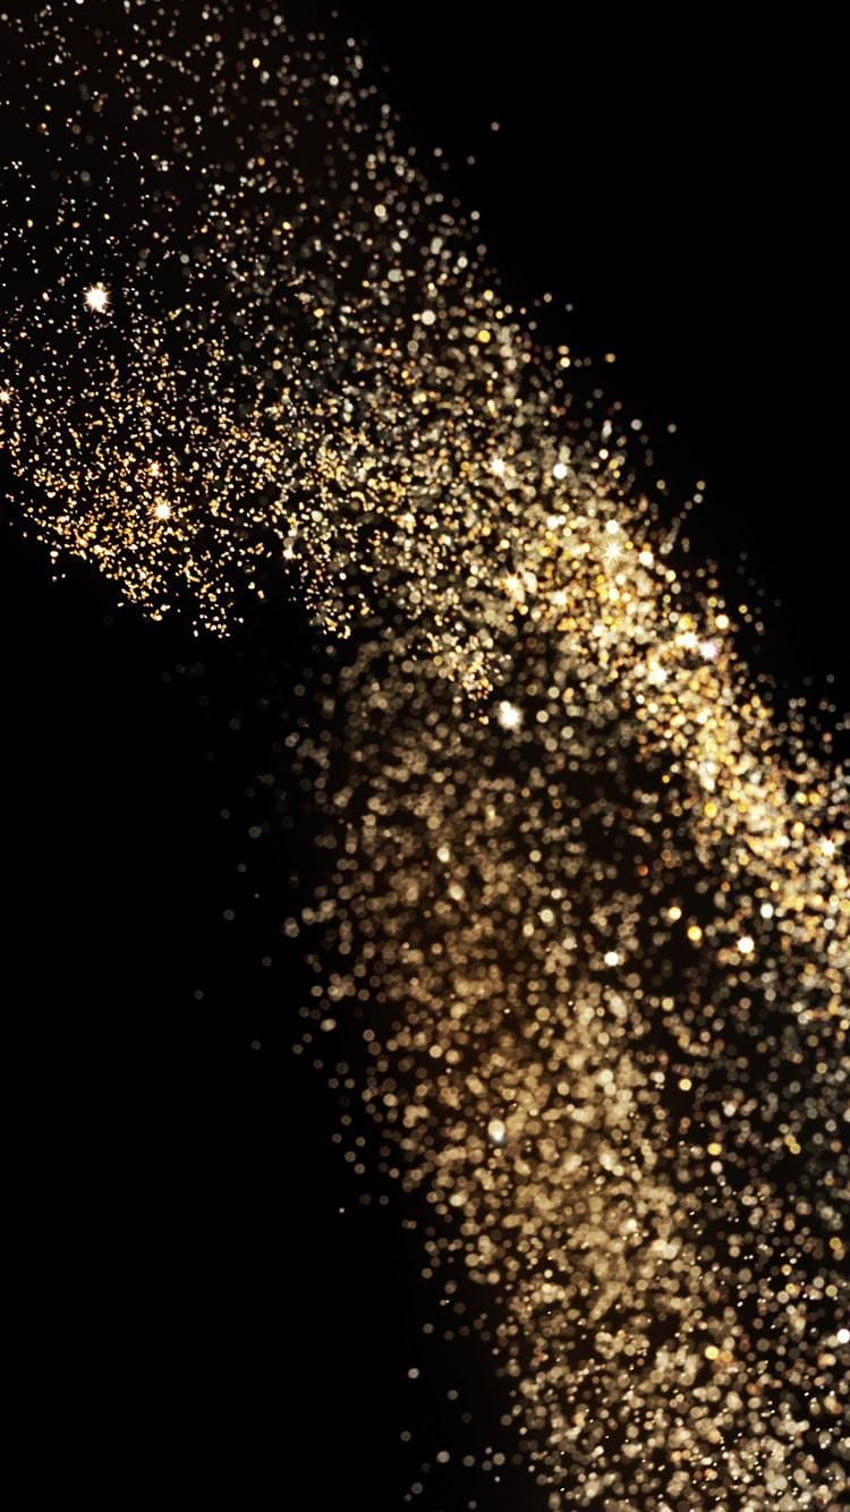 Redefine the glow of your modern day palace with our selection of finest Gold Dust. Get your hands on the shining stars of your imagination with our designer Gold Dust, bring out the flawlessness in you.